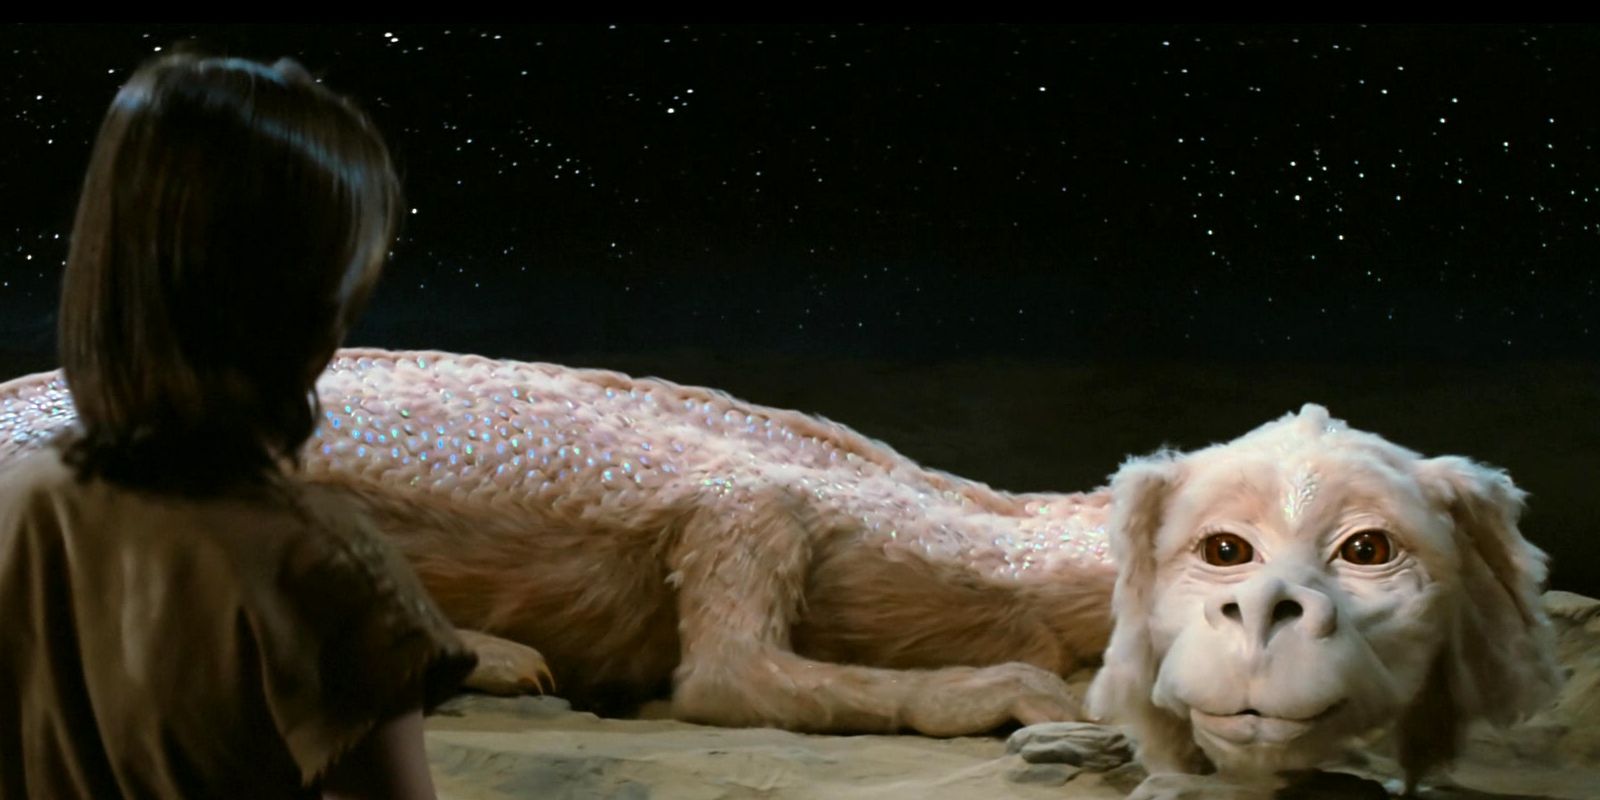 A still from the 1984 film, Neverending Story with Atreyu and Falkor.